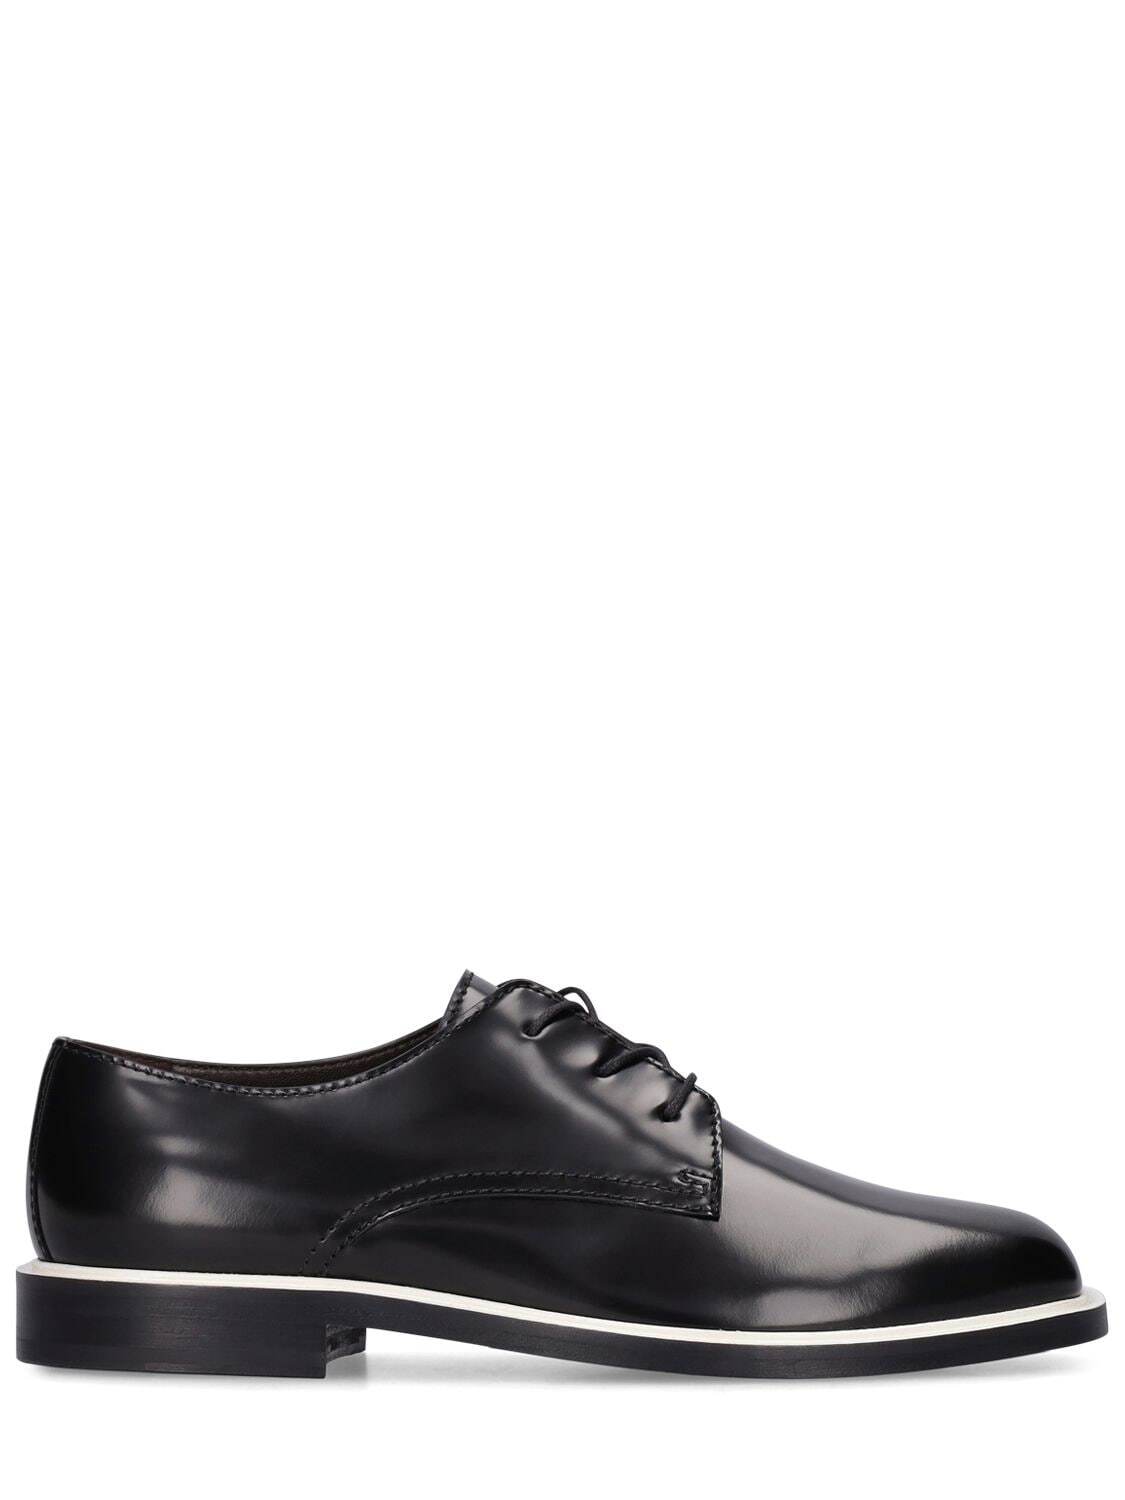 THE ROW 20mm Leather Lace-up Shoes in black / white